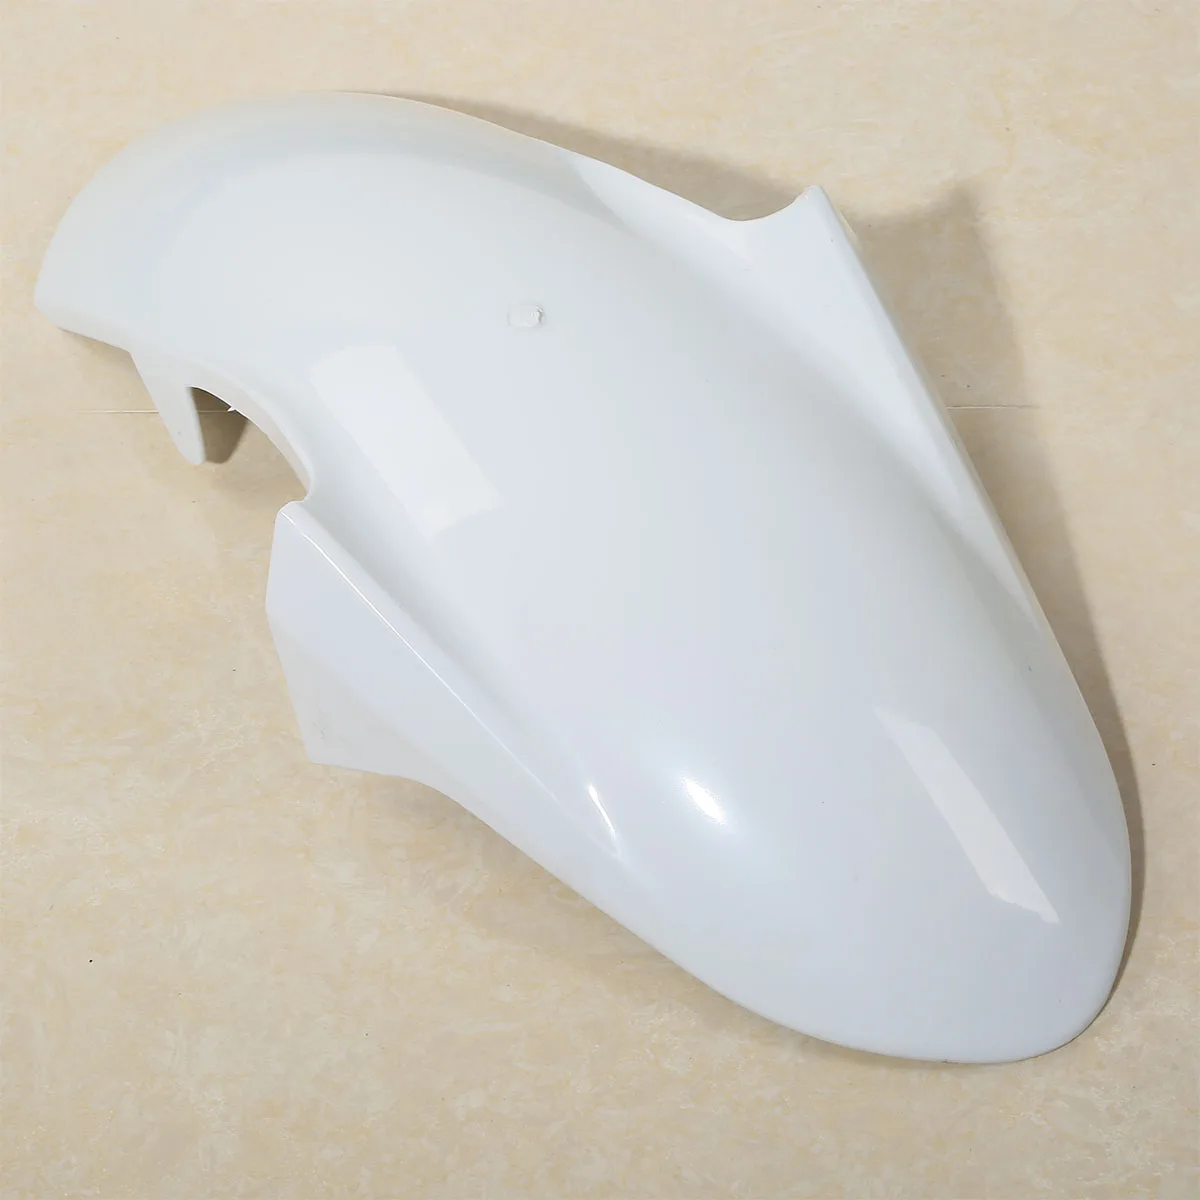 Motorcycle Unpainted White Front Fender Faring For Kawasaki KZ1000 KZ 1000 2010-2013 2012 2011 ABS plastic